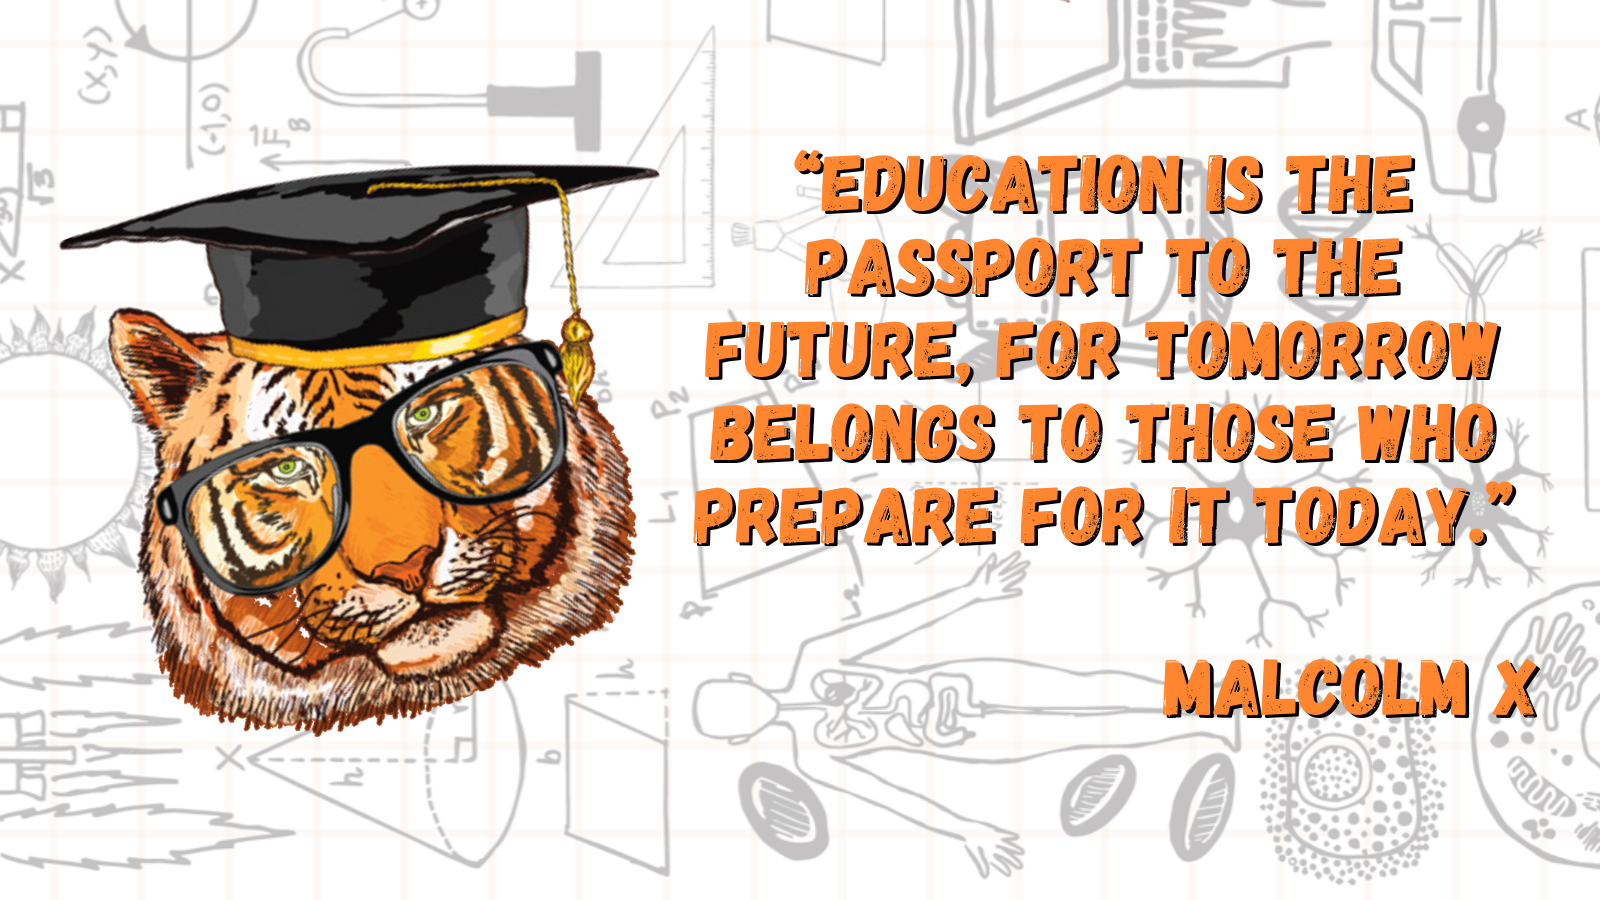 Image with Malcolm X Quote: "Education is the passport to the future, for tomorrow belongs to those who prepare for it today"